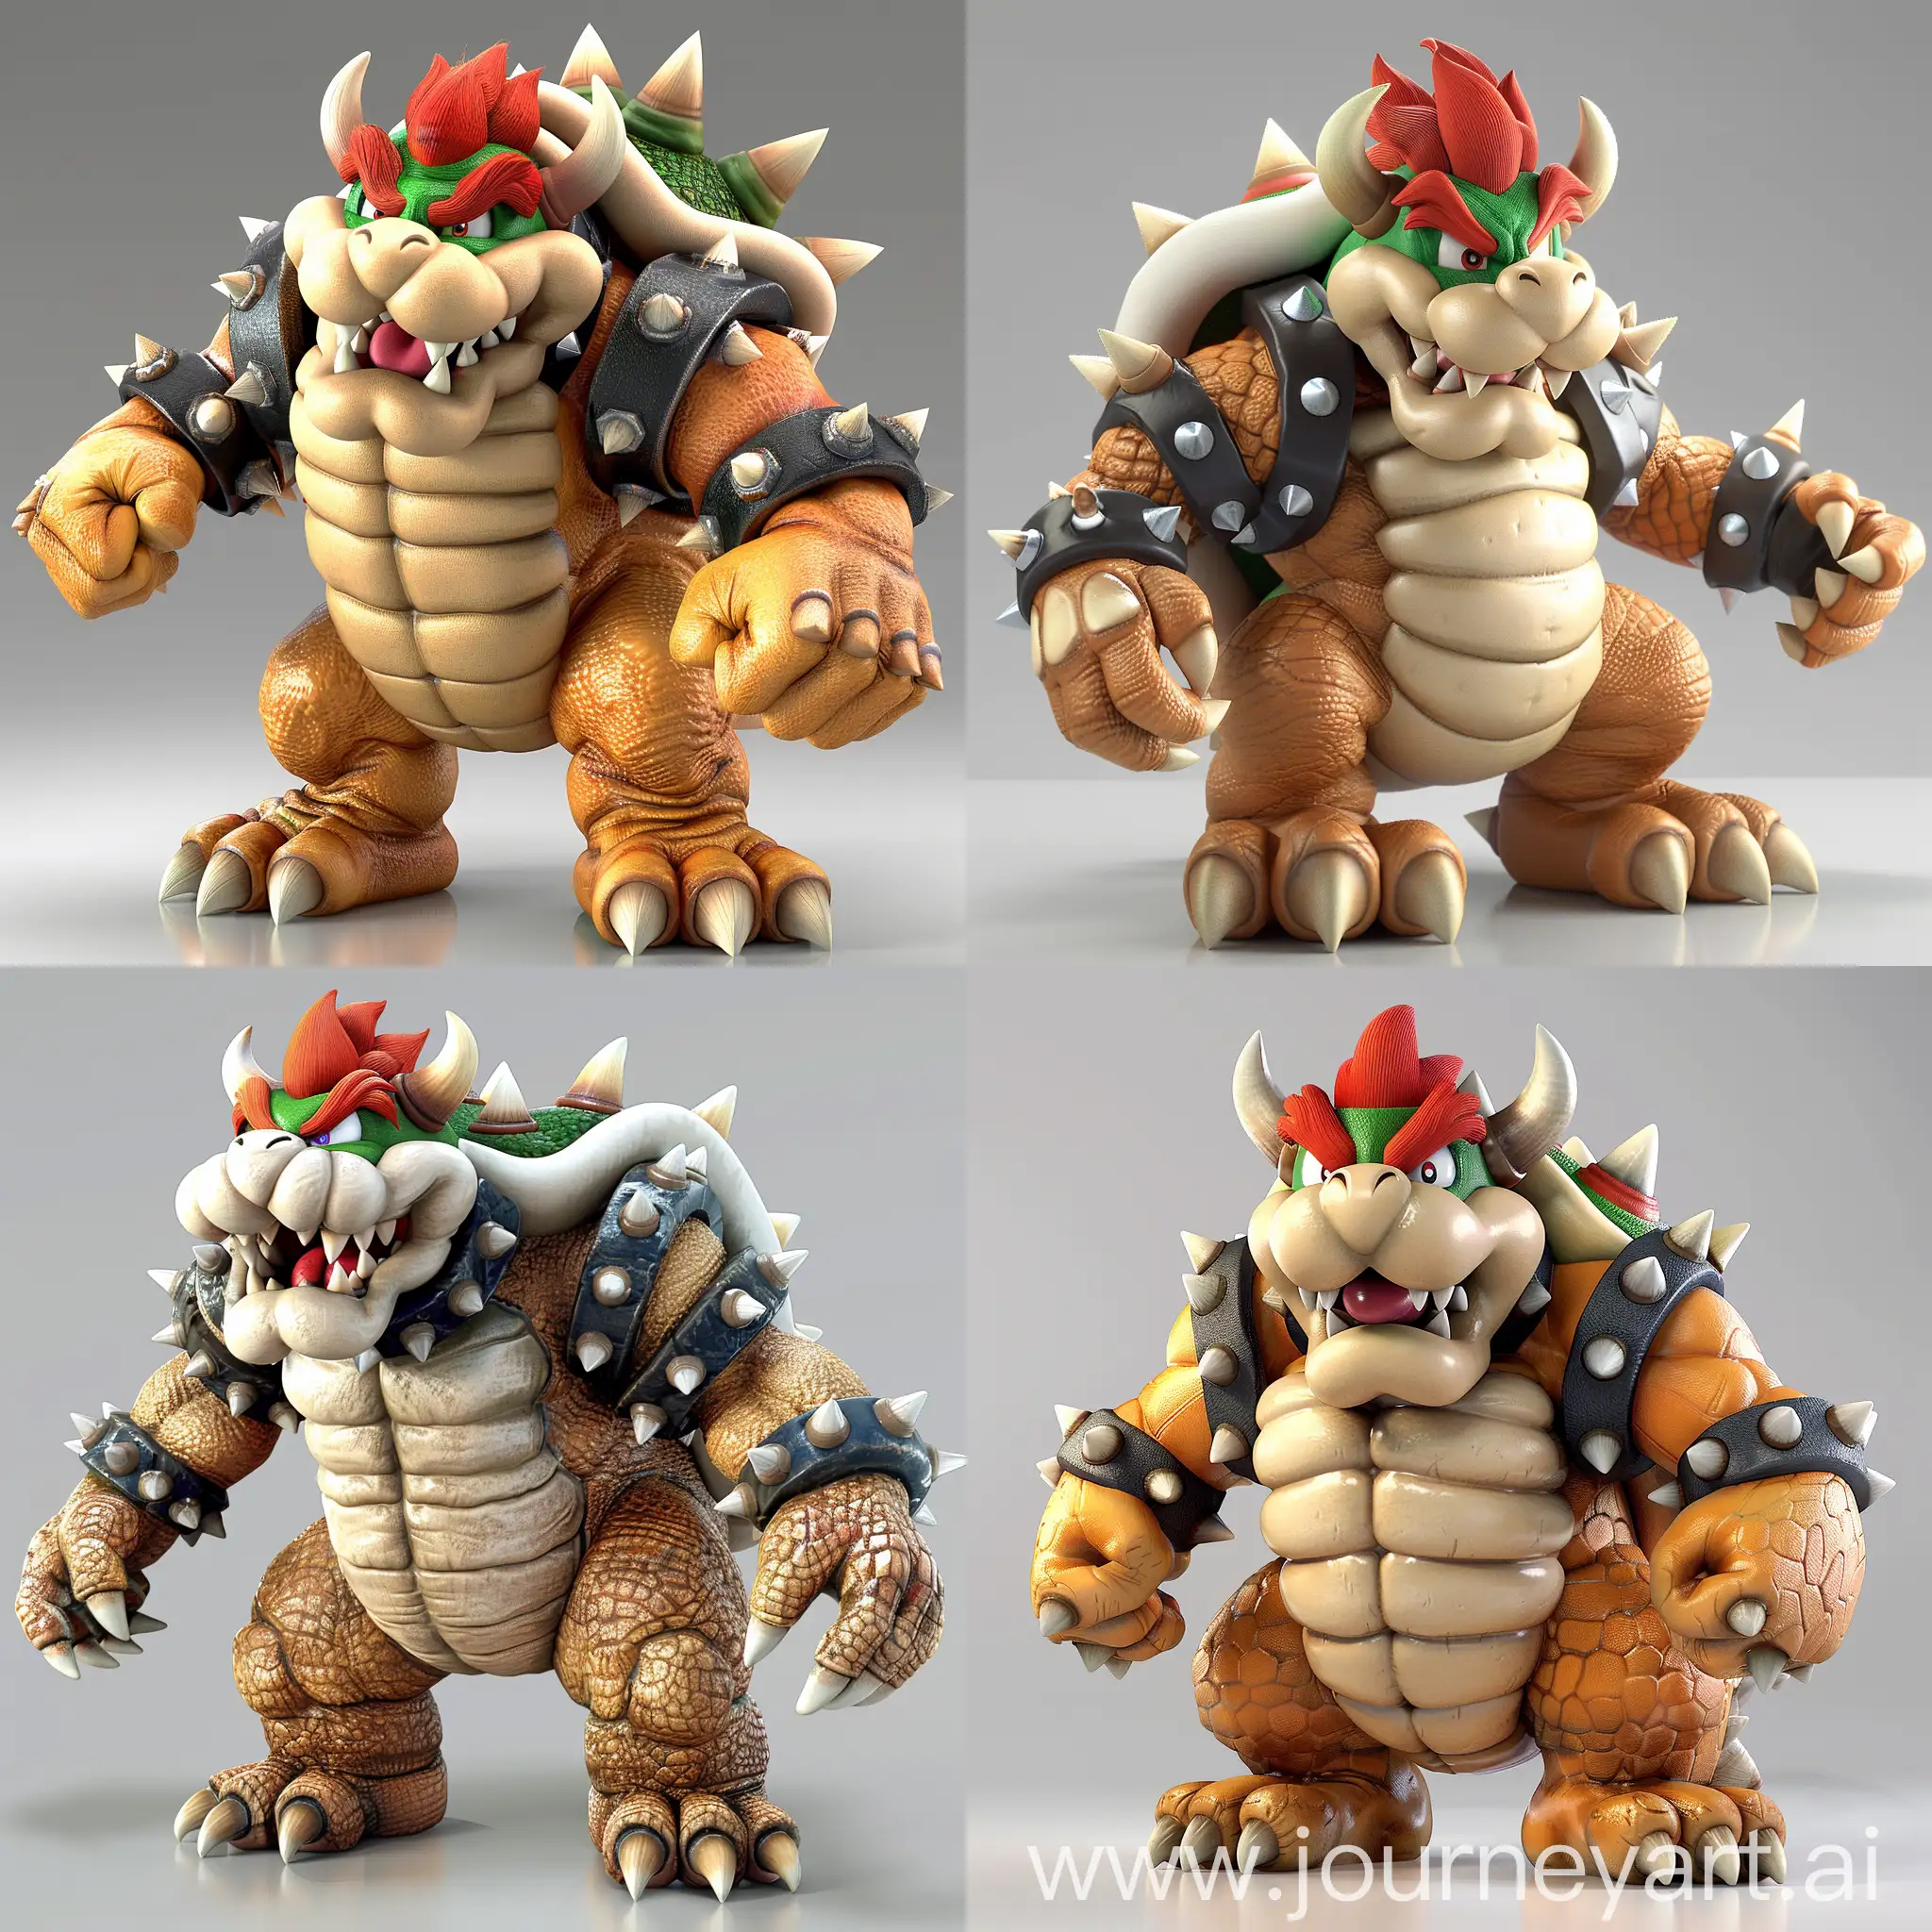 Bowser,In Super Mario Bros. CharacterRendering 3D,